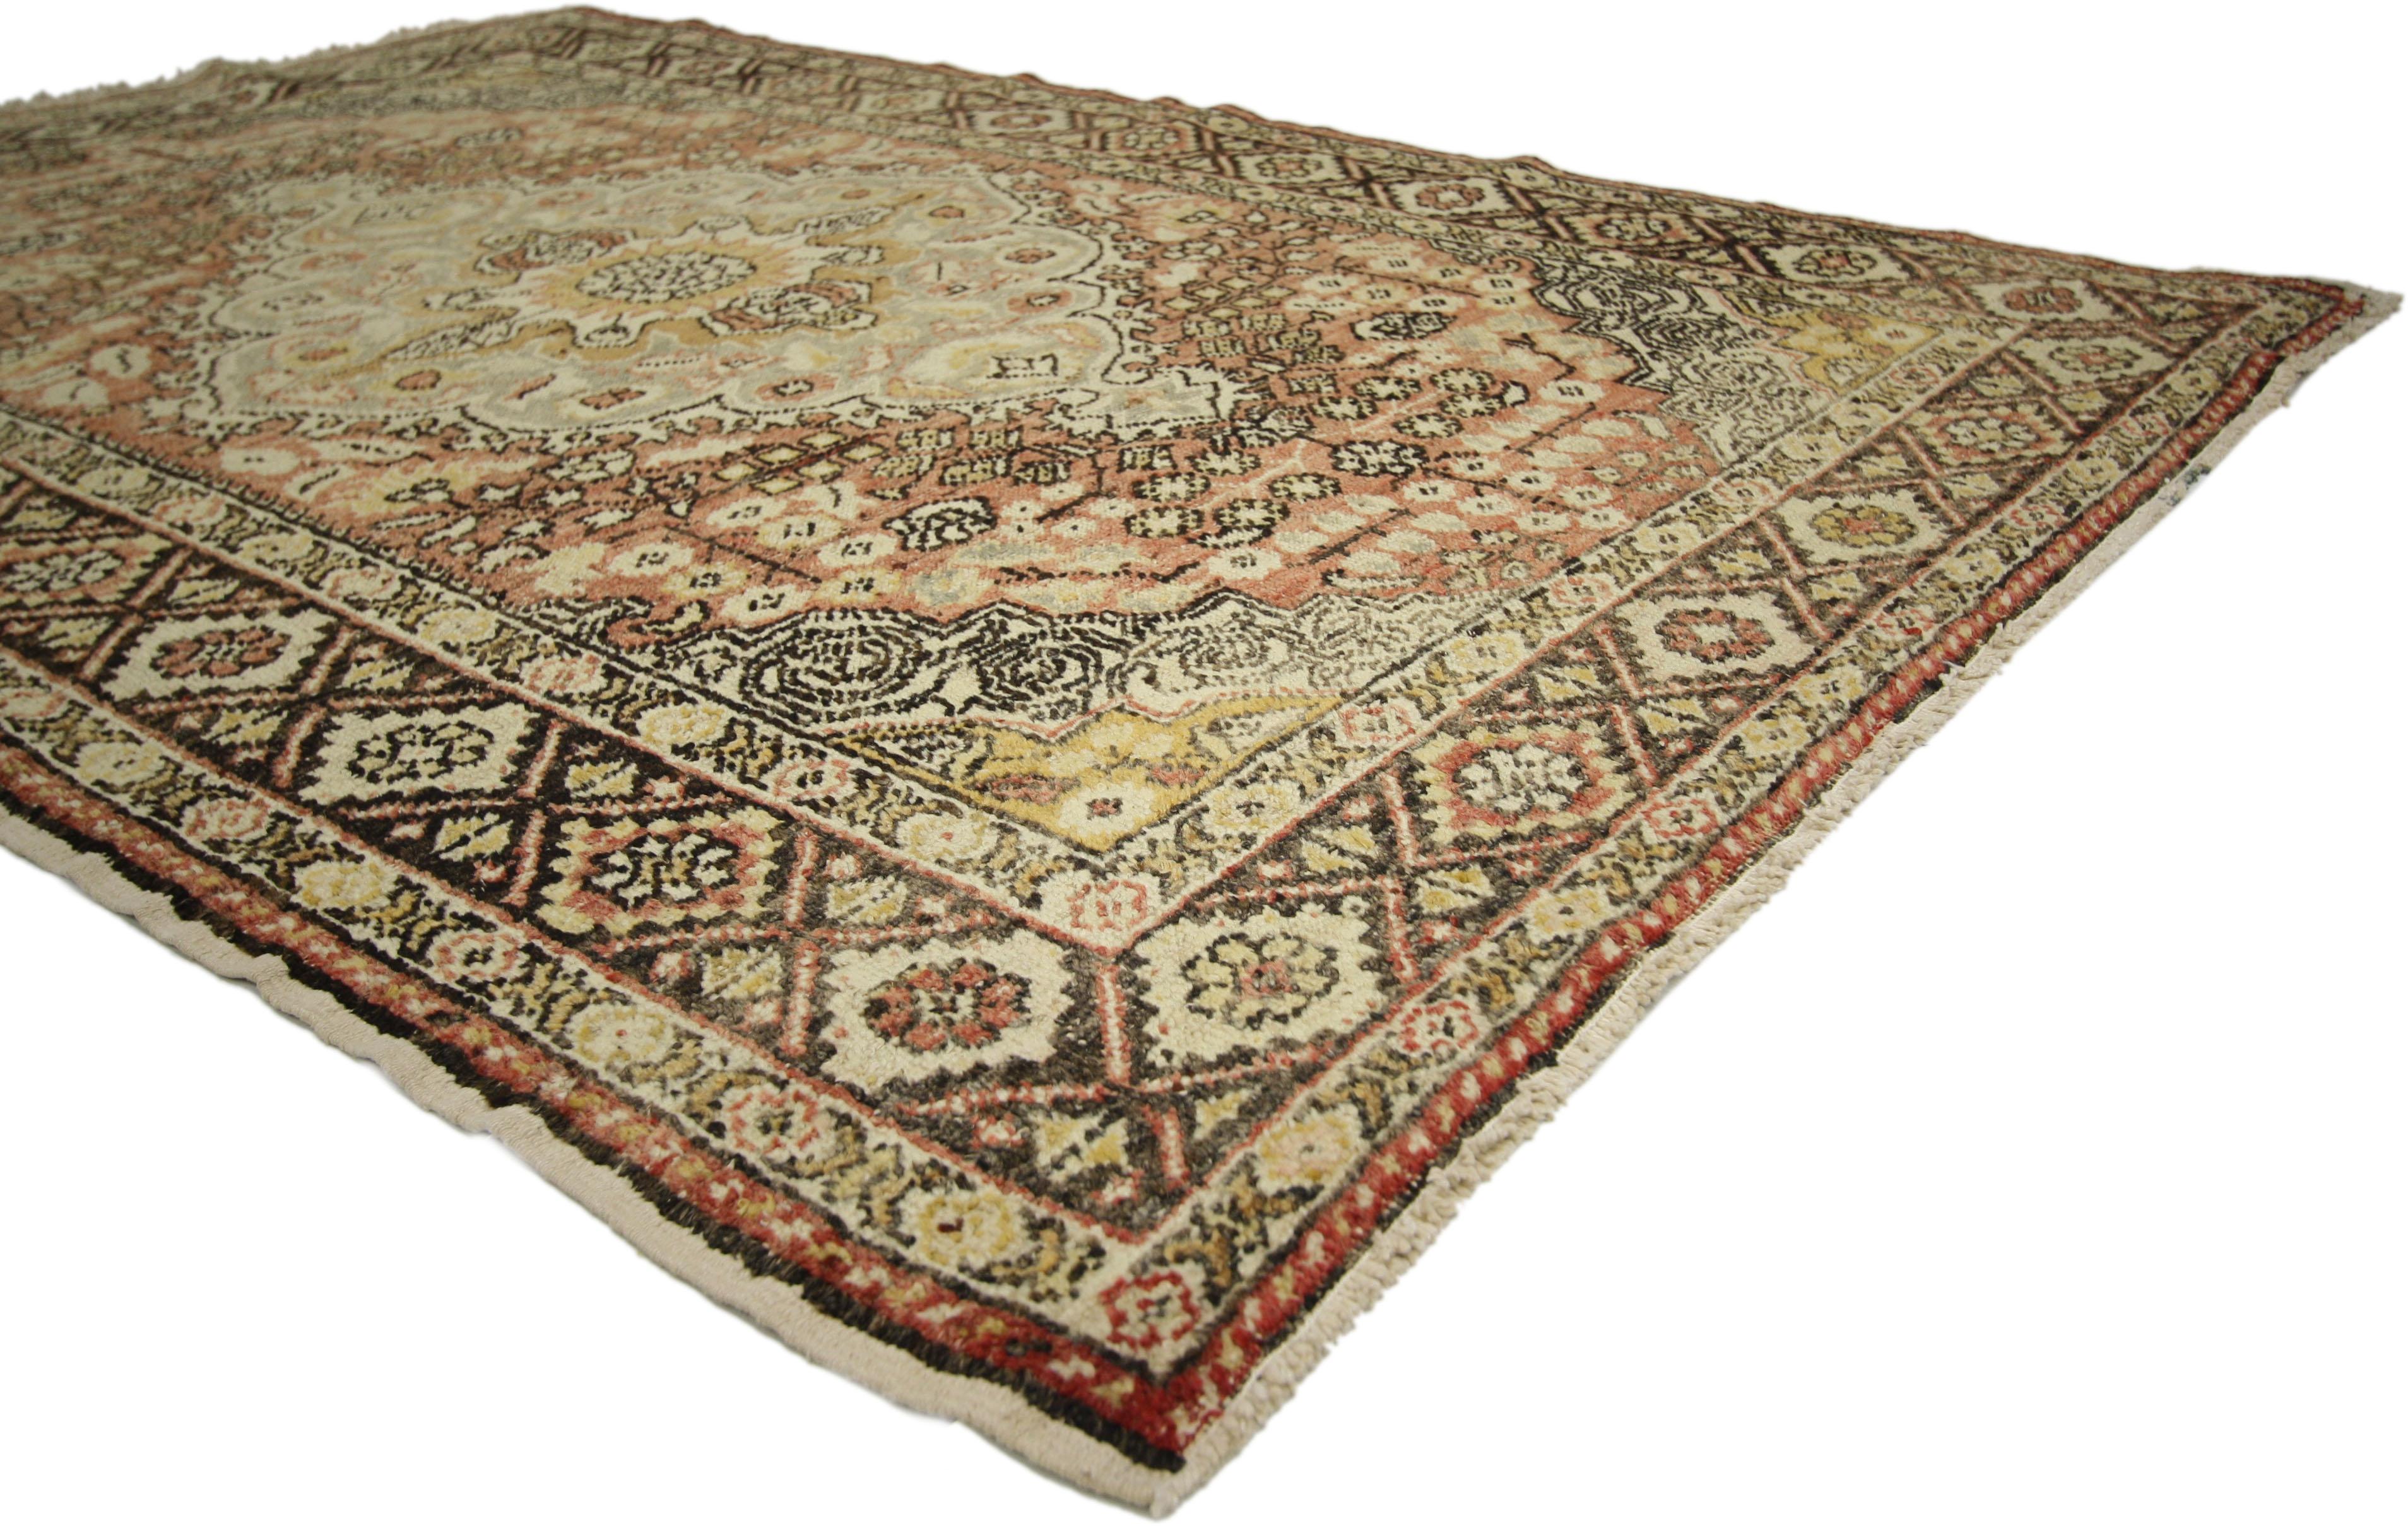 73912 Distressed Vintage Turkish Sivas Rug with Rustic Cottage Arts & Crafts Style. With architectural elements of curved forms and decorative detailing, this hand knotted wool vintage Turkish Sivas rug features a cusped center medallion surrounded